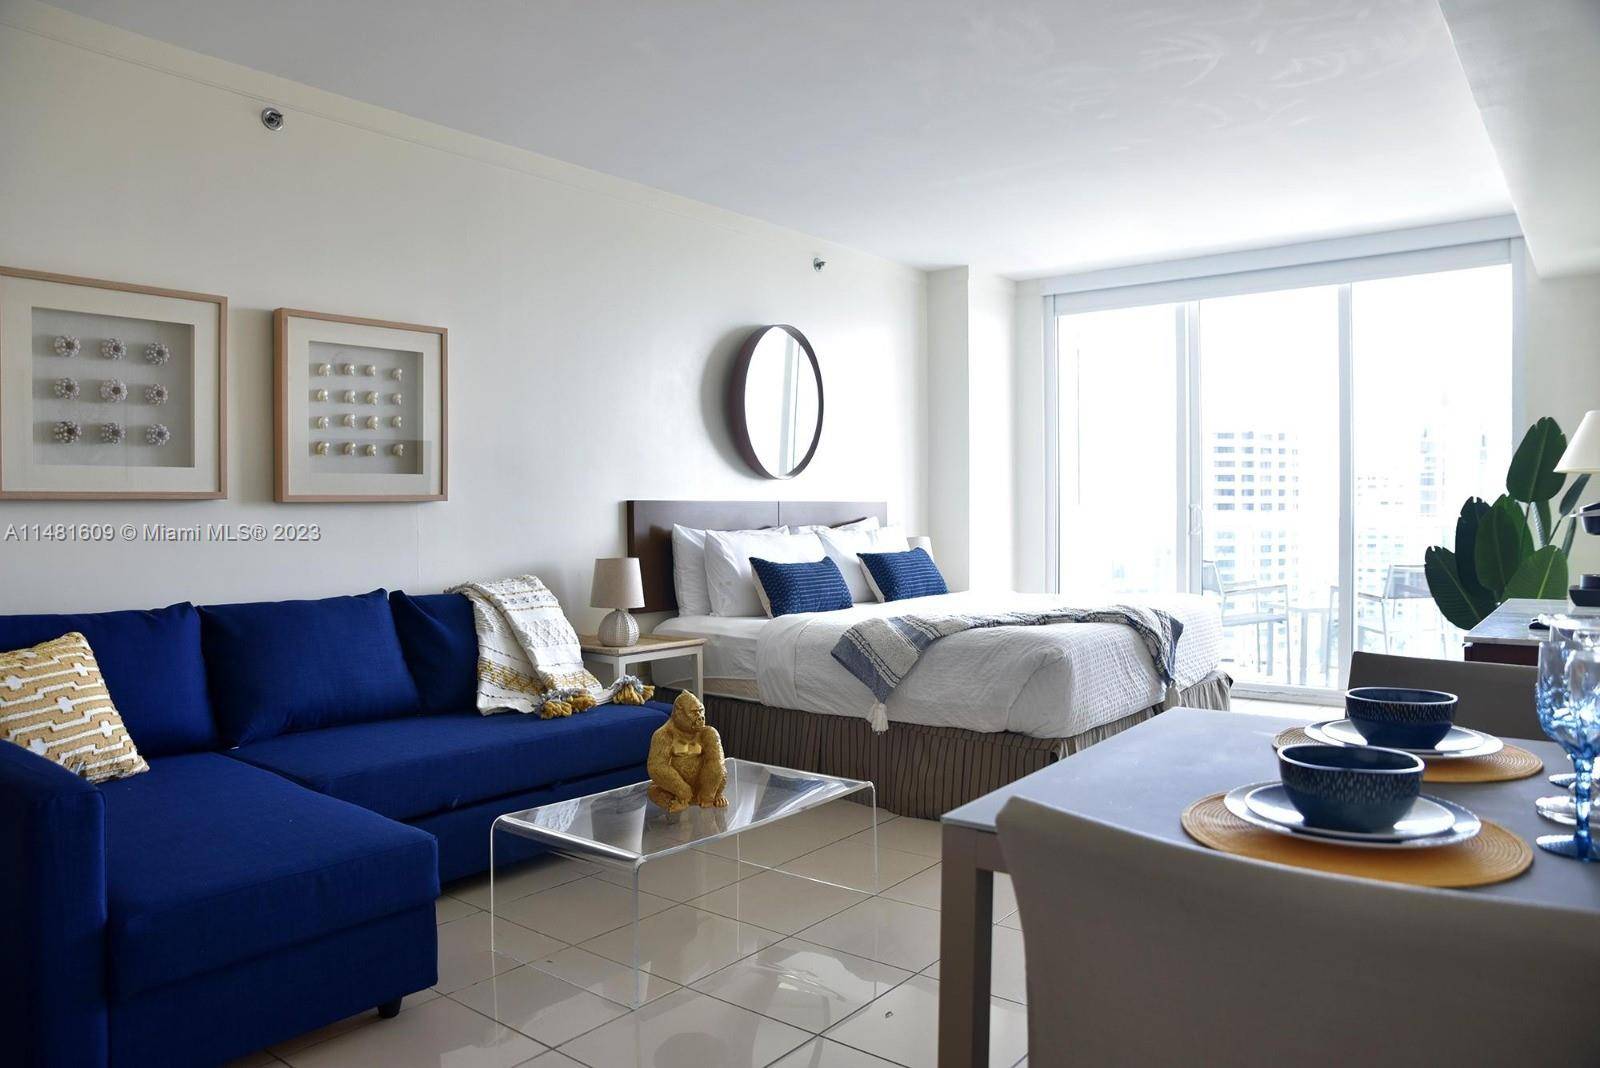 Situated on the 19th floor while being in one of the preferable line of the building 03 line, you will find yourself in one of the most desirable studio in ...